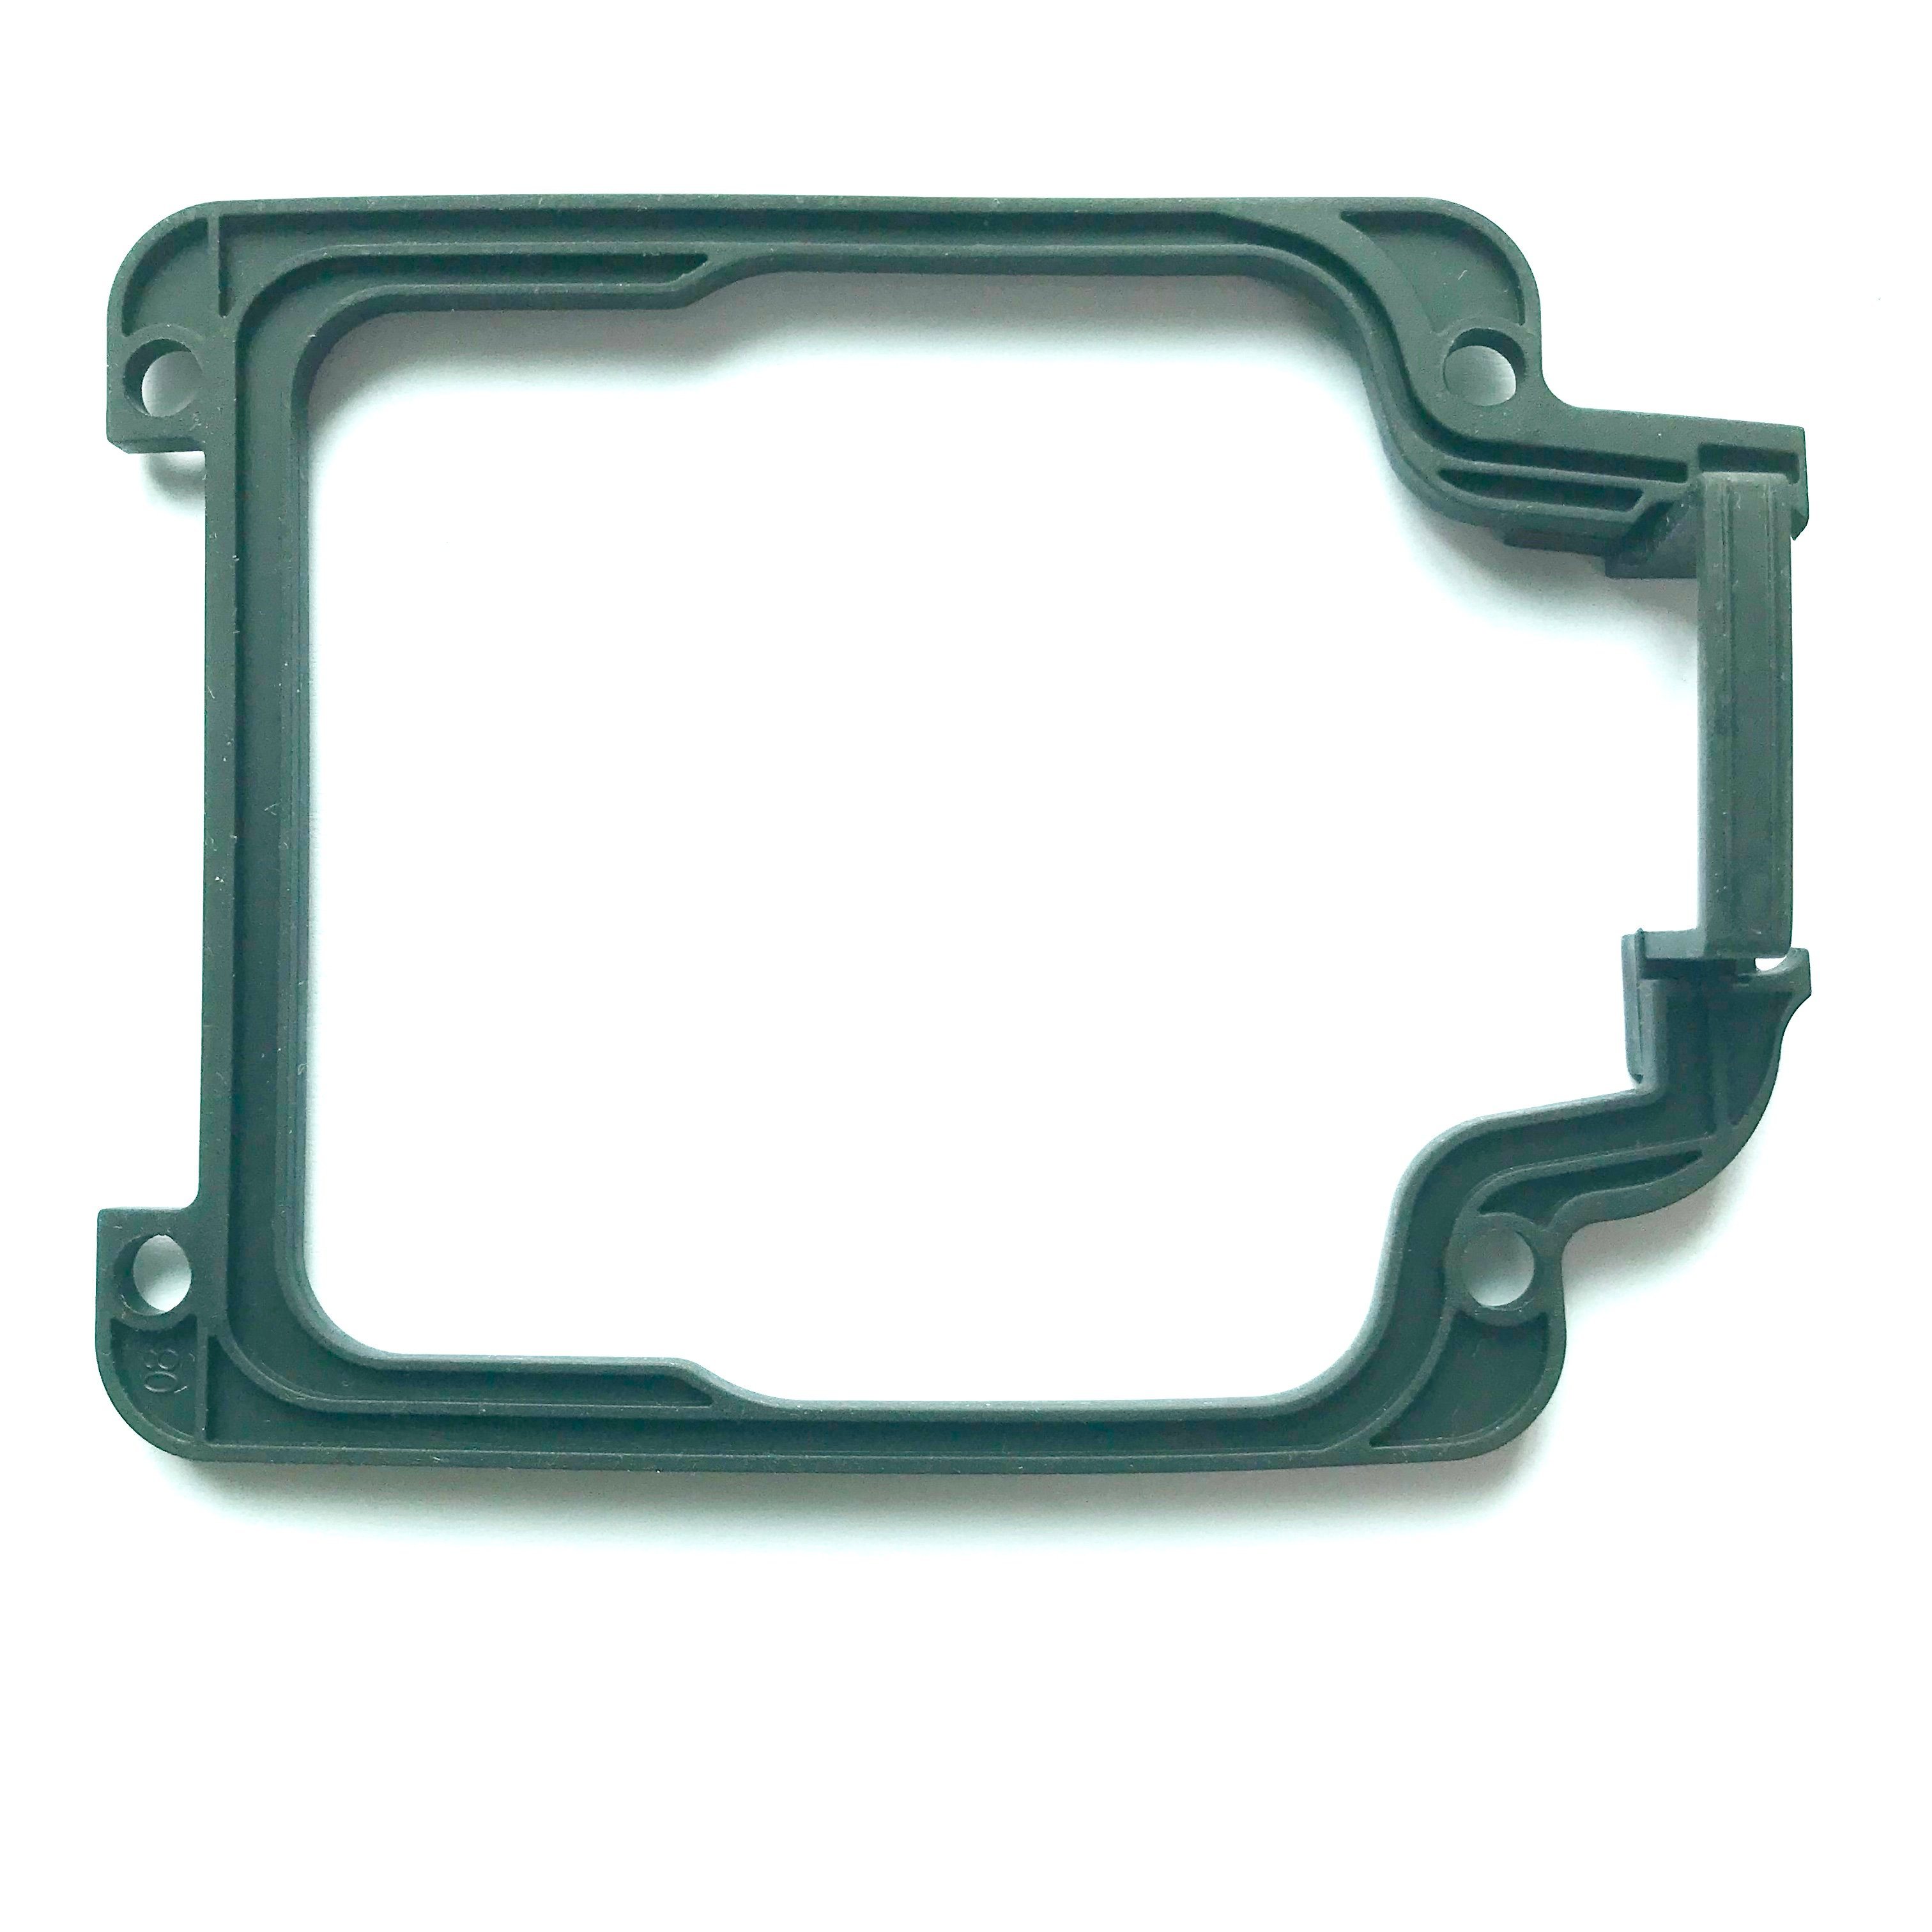 OEM/ODM Custom Molded Rubber Gasket Rubber Products